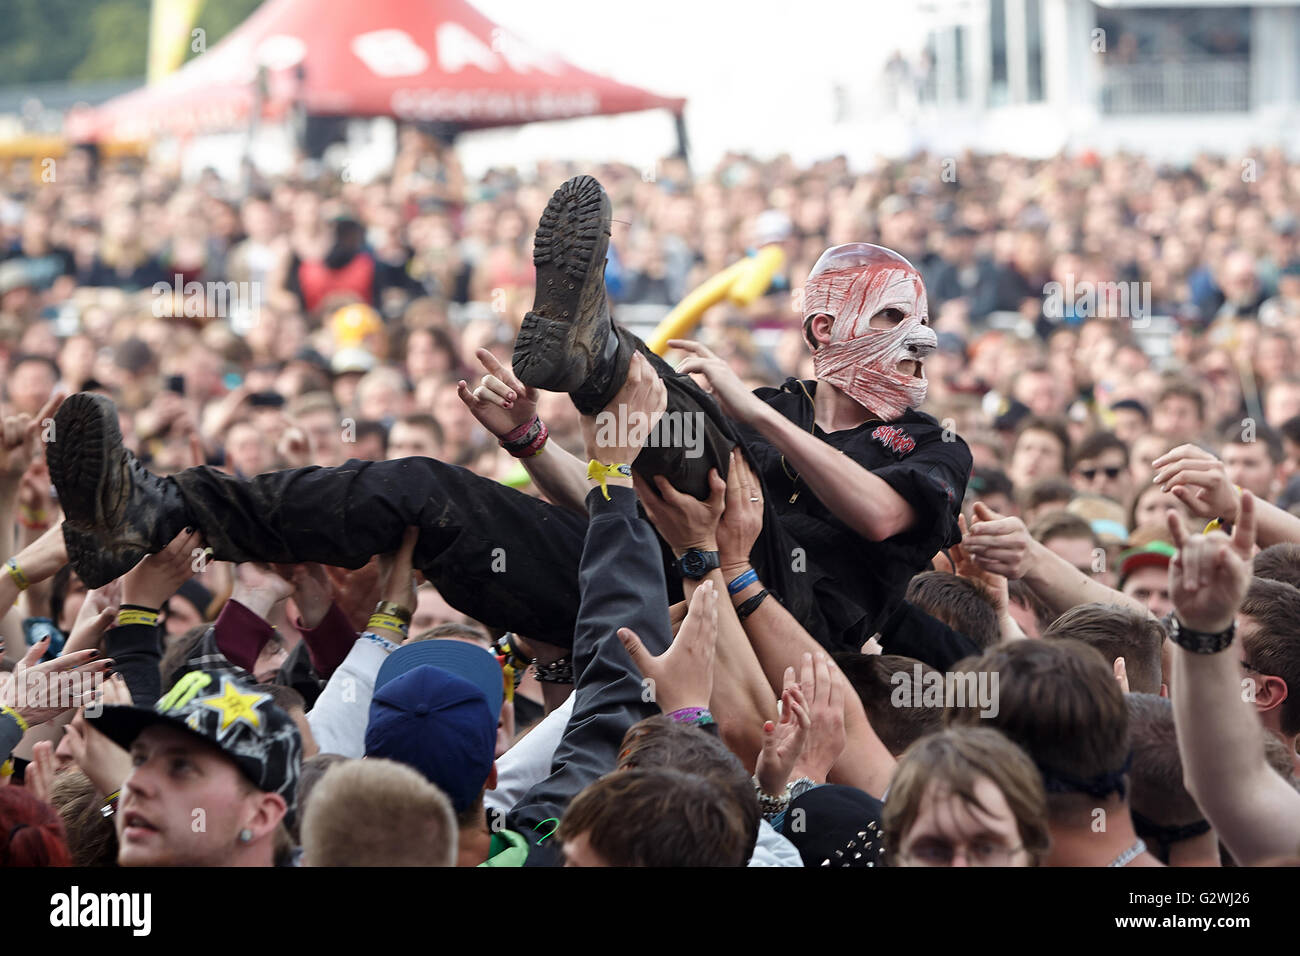 Mendig, Germany. 03rd June, 2016. A stage diver is carried by the crowd  during the performance of US metal band Disturbed at the 'Rock am Ring' ( Rock at the Ring) music festival